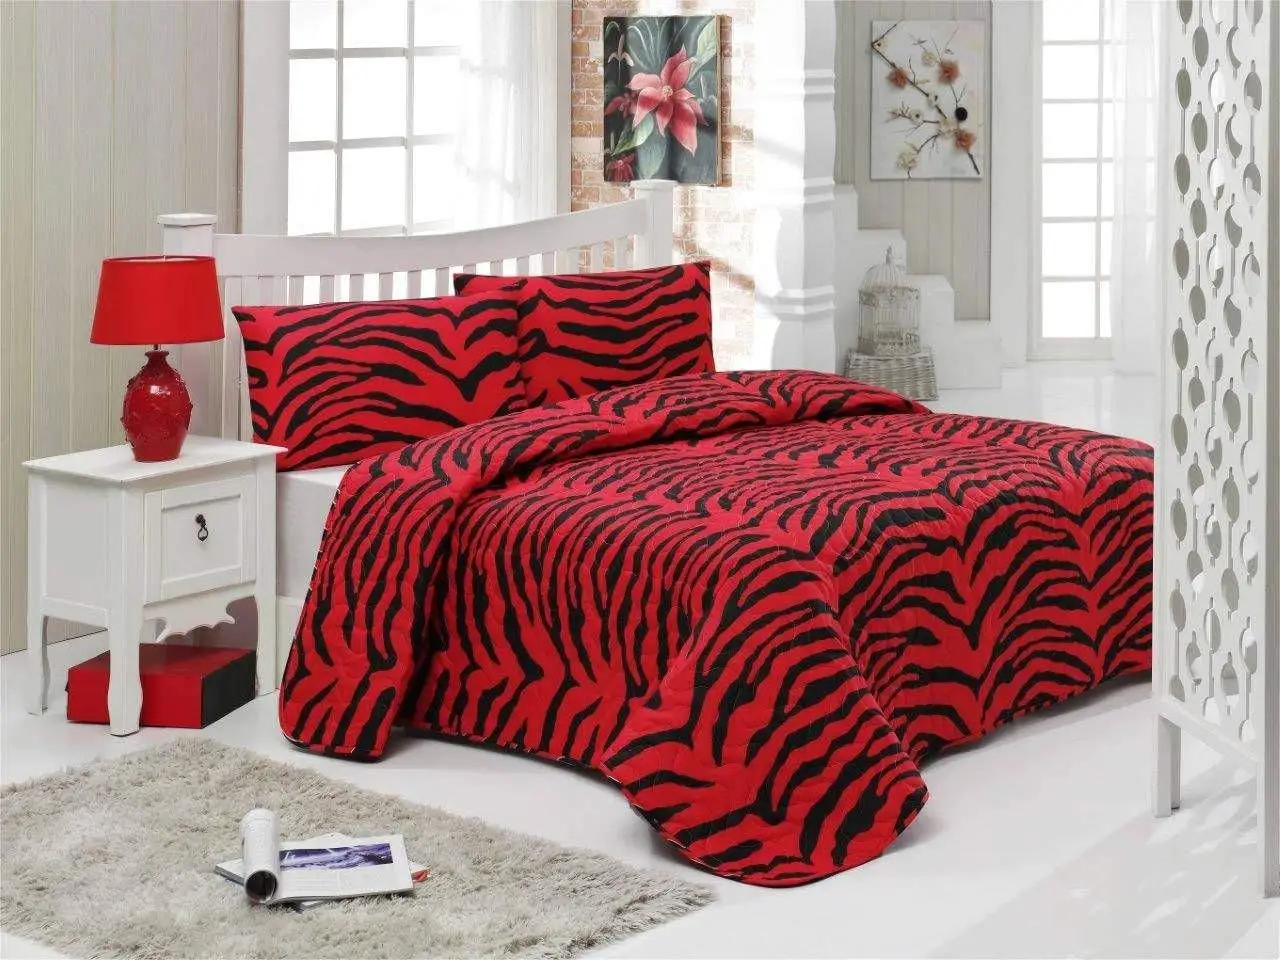 Buy Luxury 100 Cotton Black And White Zebra Animal Print 3pc Bedspread 4pc Burgundy Sheet Set Queen Size With Everything Bed In A Bag In Cheap Price On M Alibaba Com